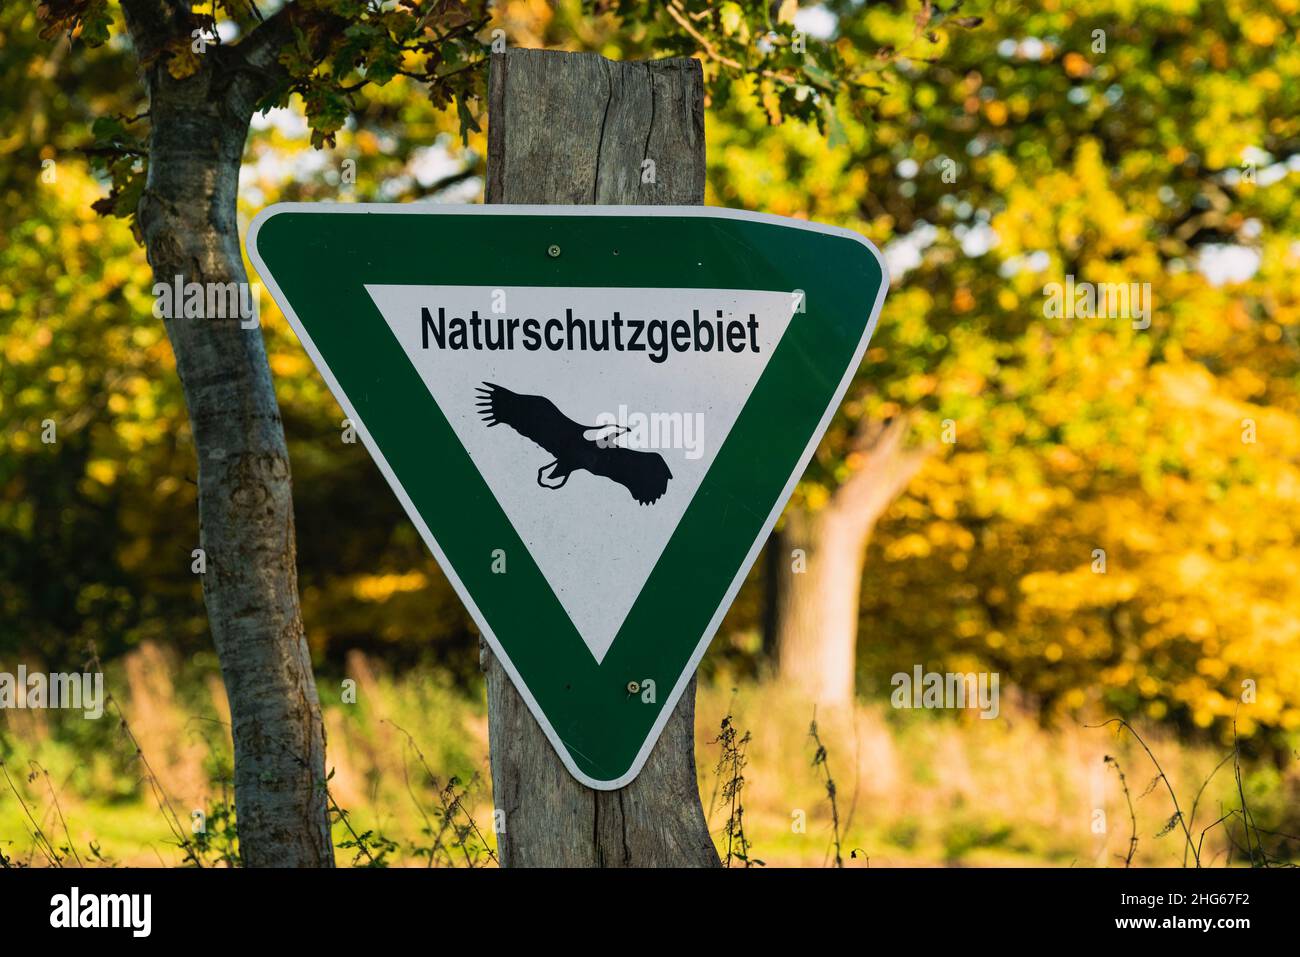 Sign for a nature reserve (“Naturschutzgebiet”) in the Reinhardswald, Hesse, Germany Stock Photo